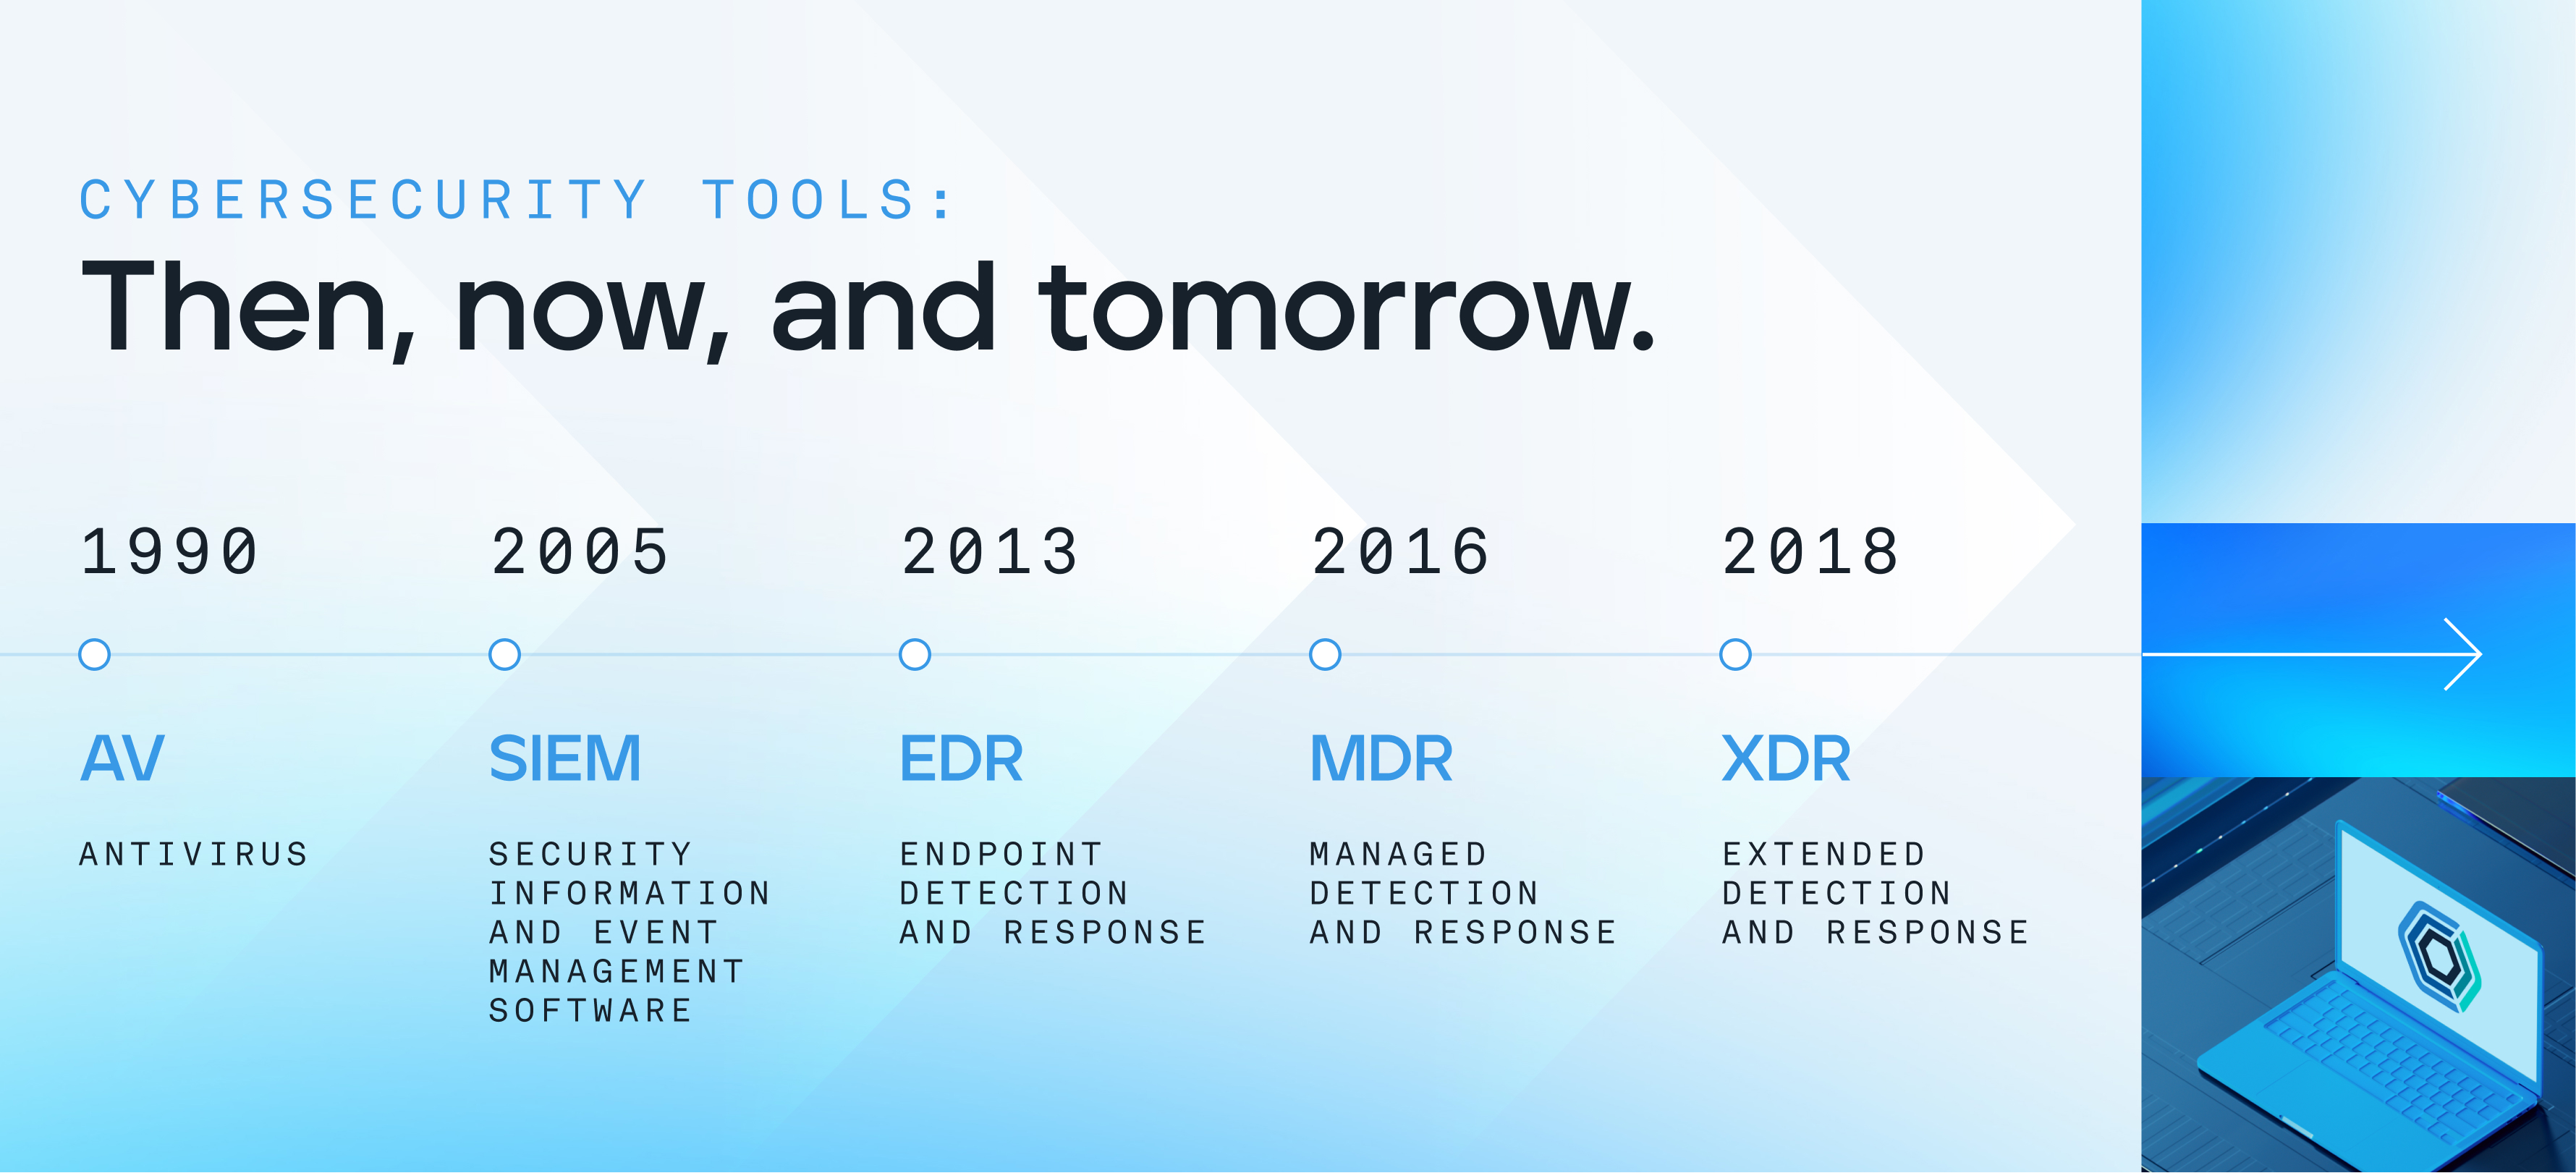 The future of cybersecurity tools: then, now, and tomorrow. 1990 = AV. 2005 = SIEM. 2013 = EDR. 2016 = MDR. 2018 = XDR